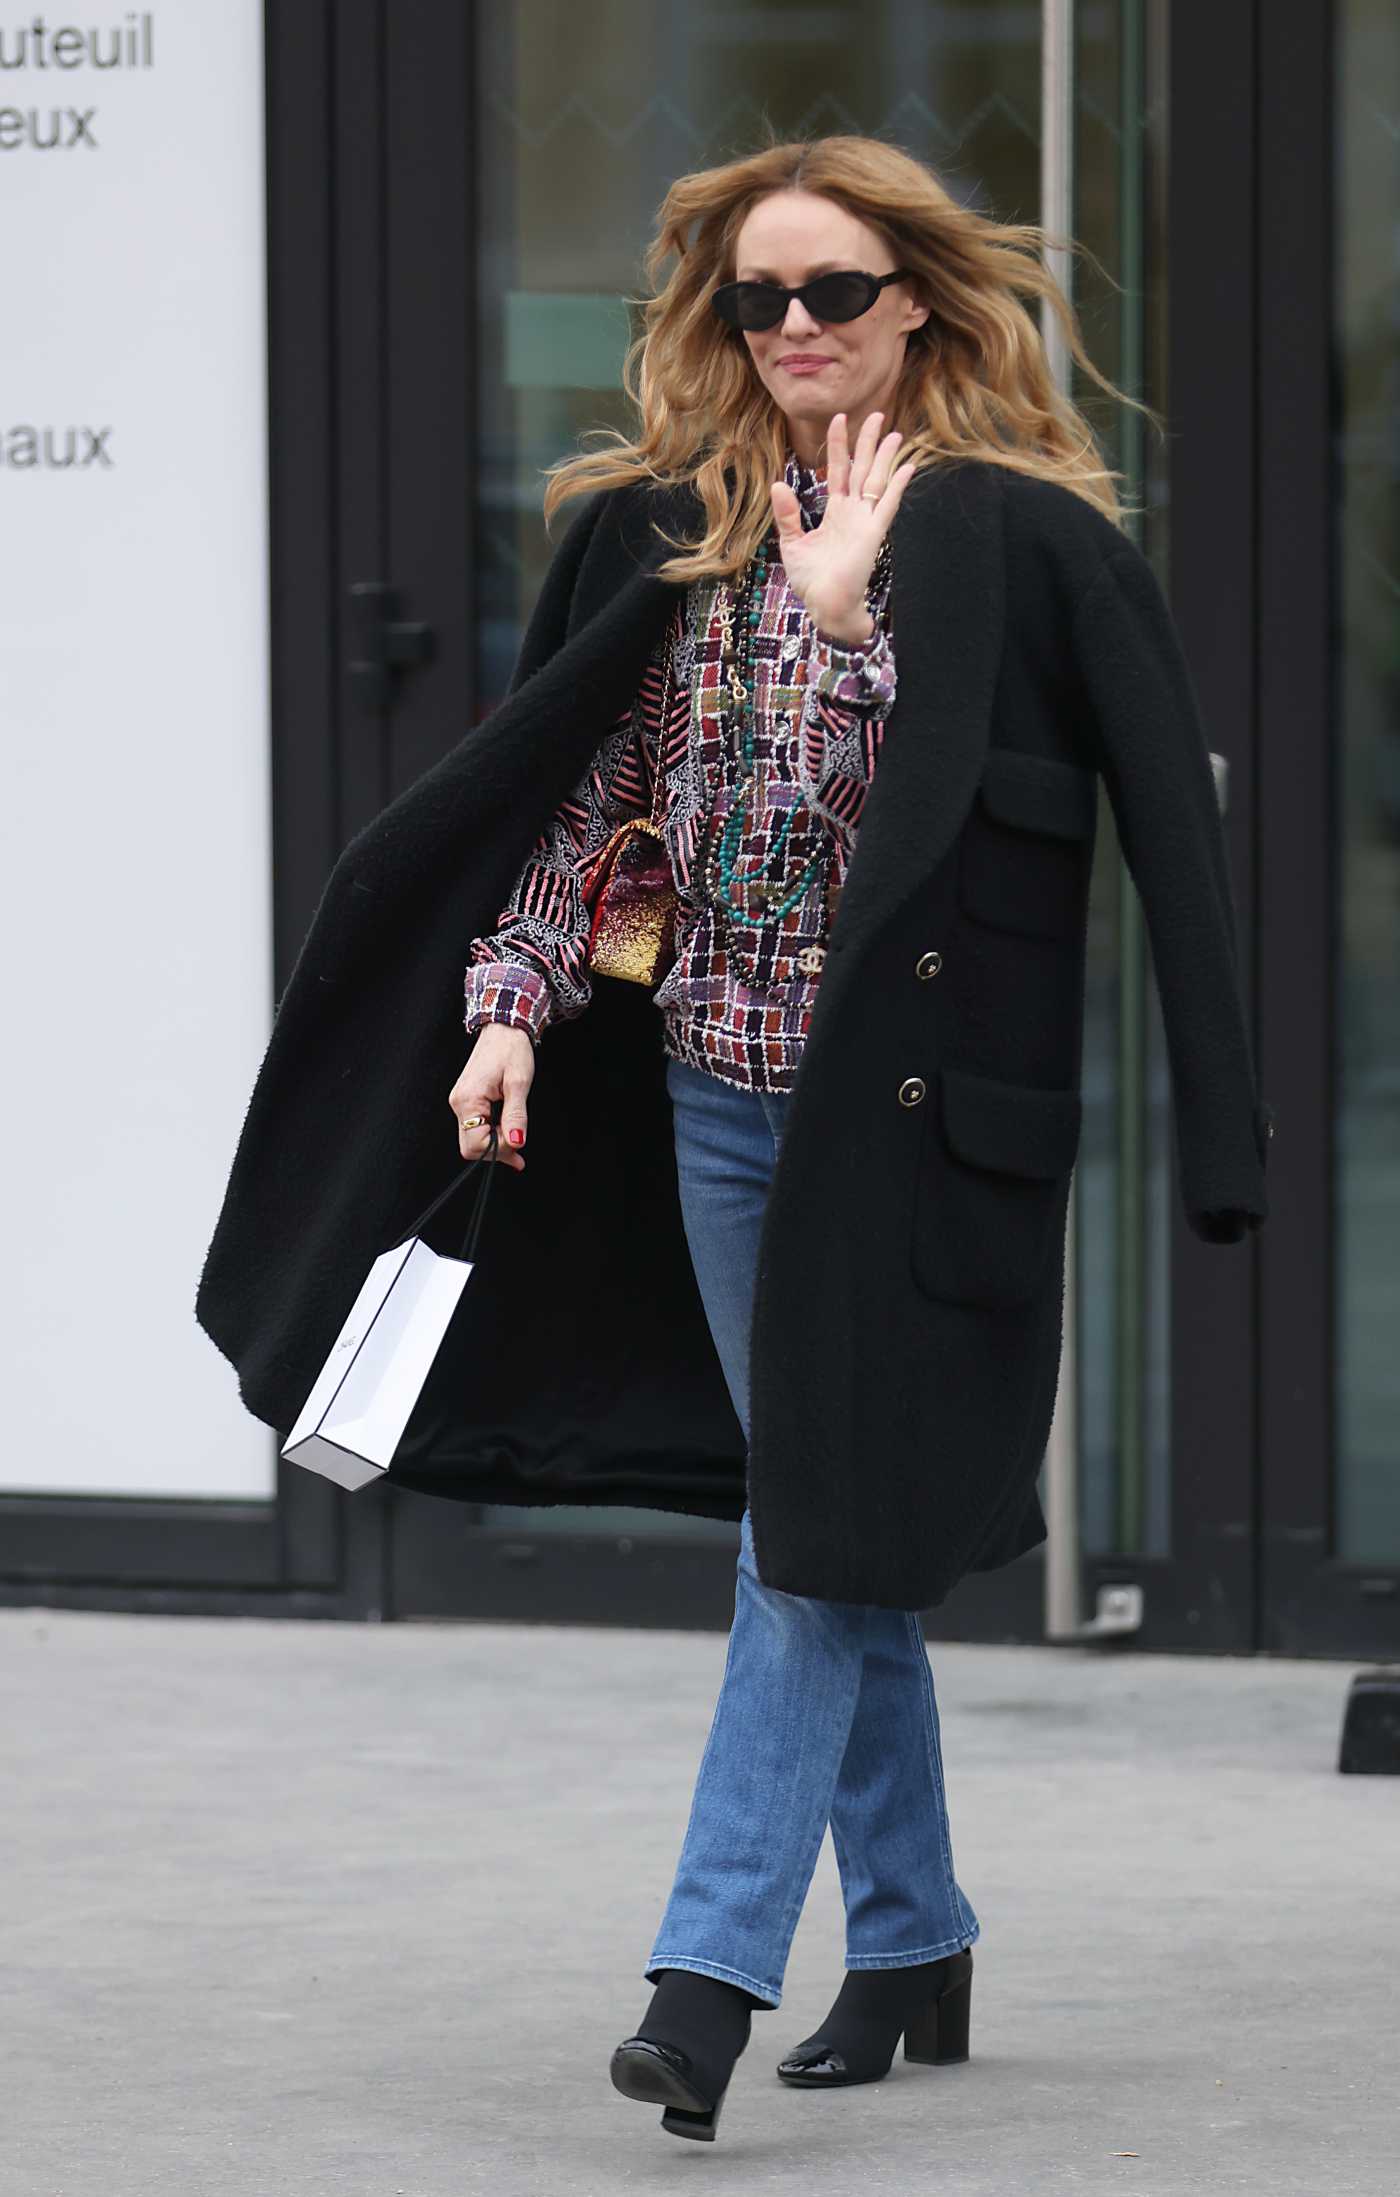 Vanessa Paradis in a Black Coat Was Seen Out in Paris 01/24/2023